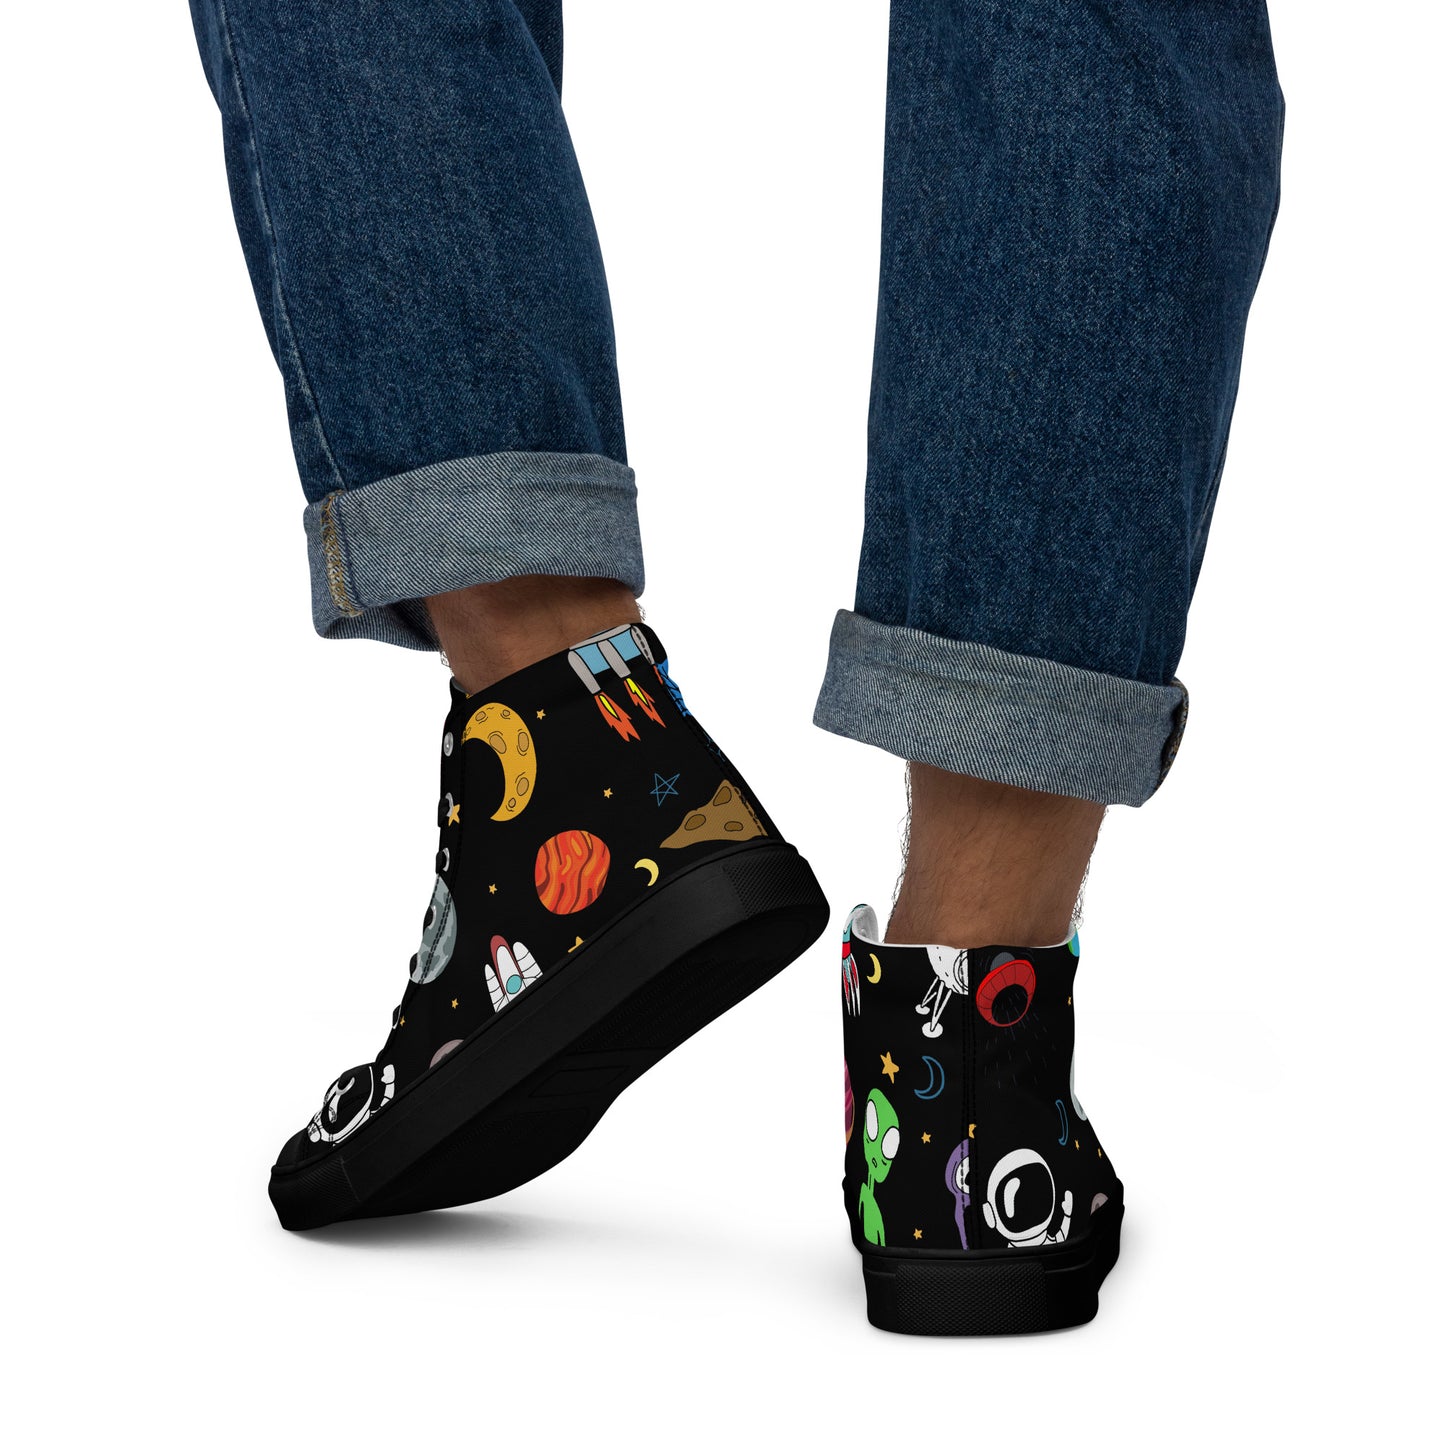 Space - Men’s high top canvas shoes Mens High Top Shoes Space